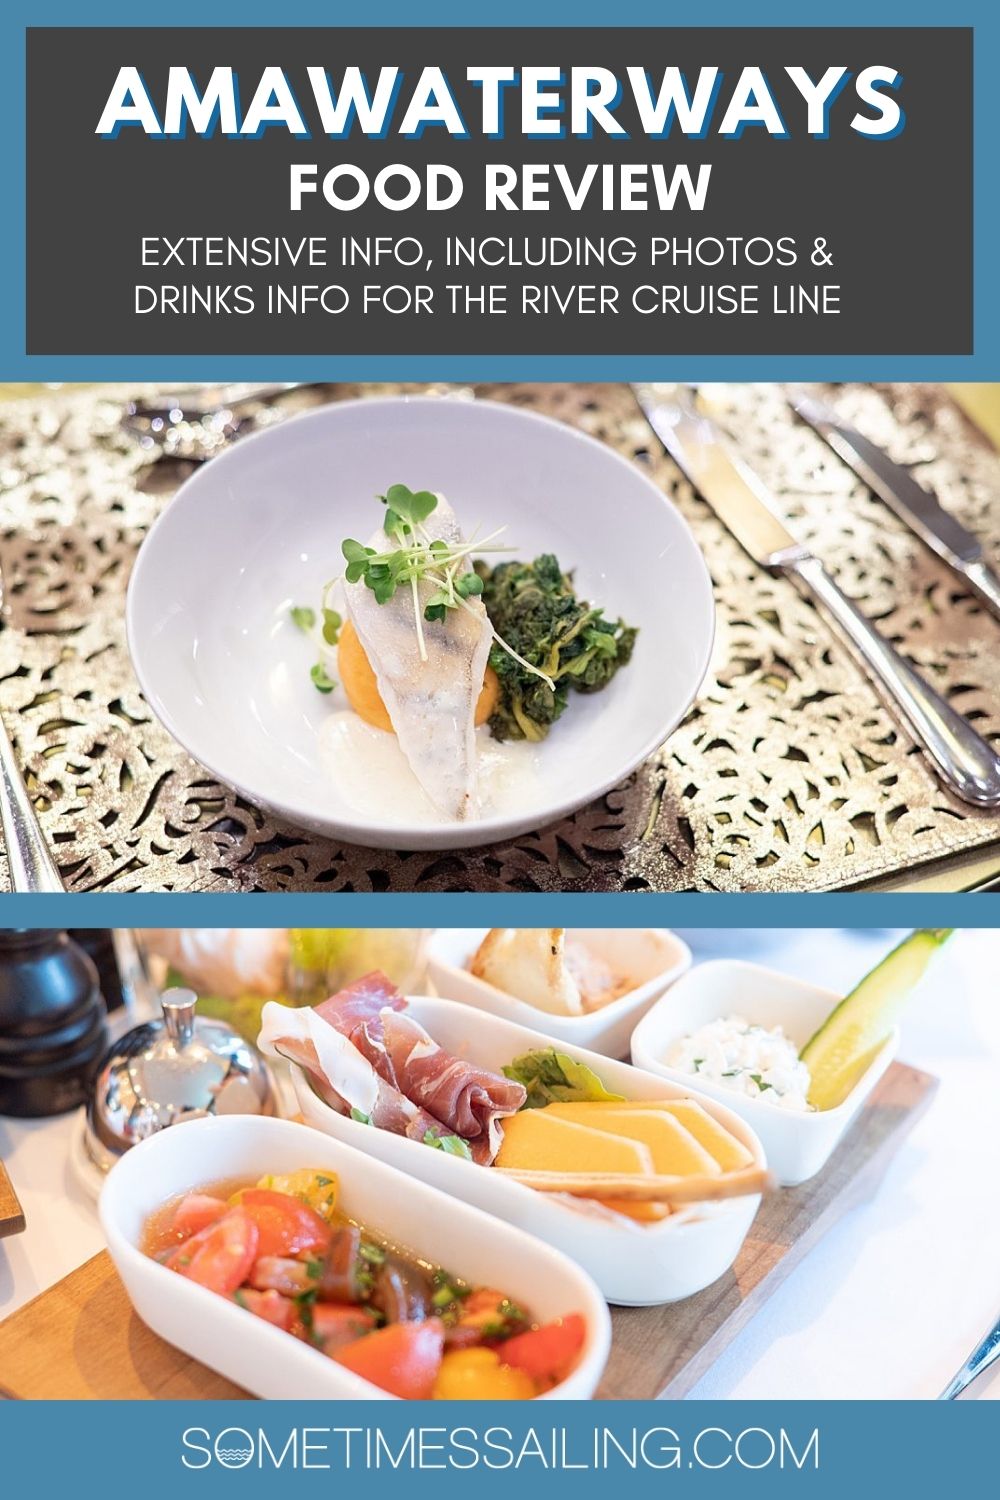 AmaWaterways Food Review with pictures of dishes below it.